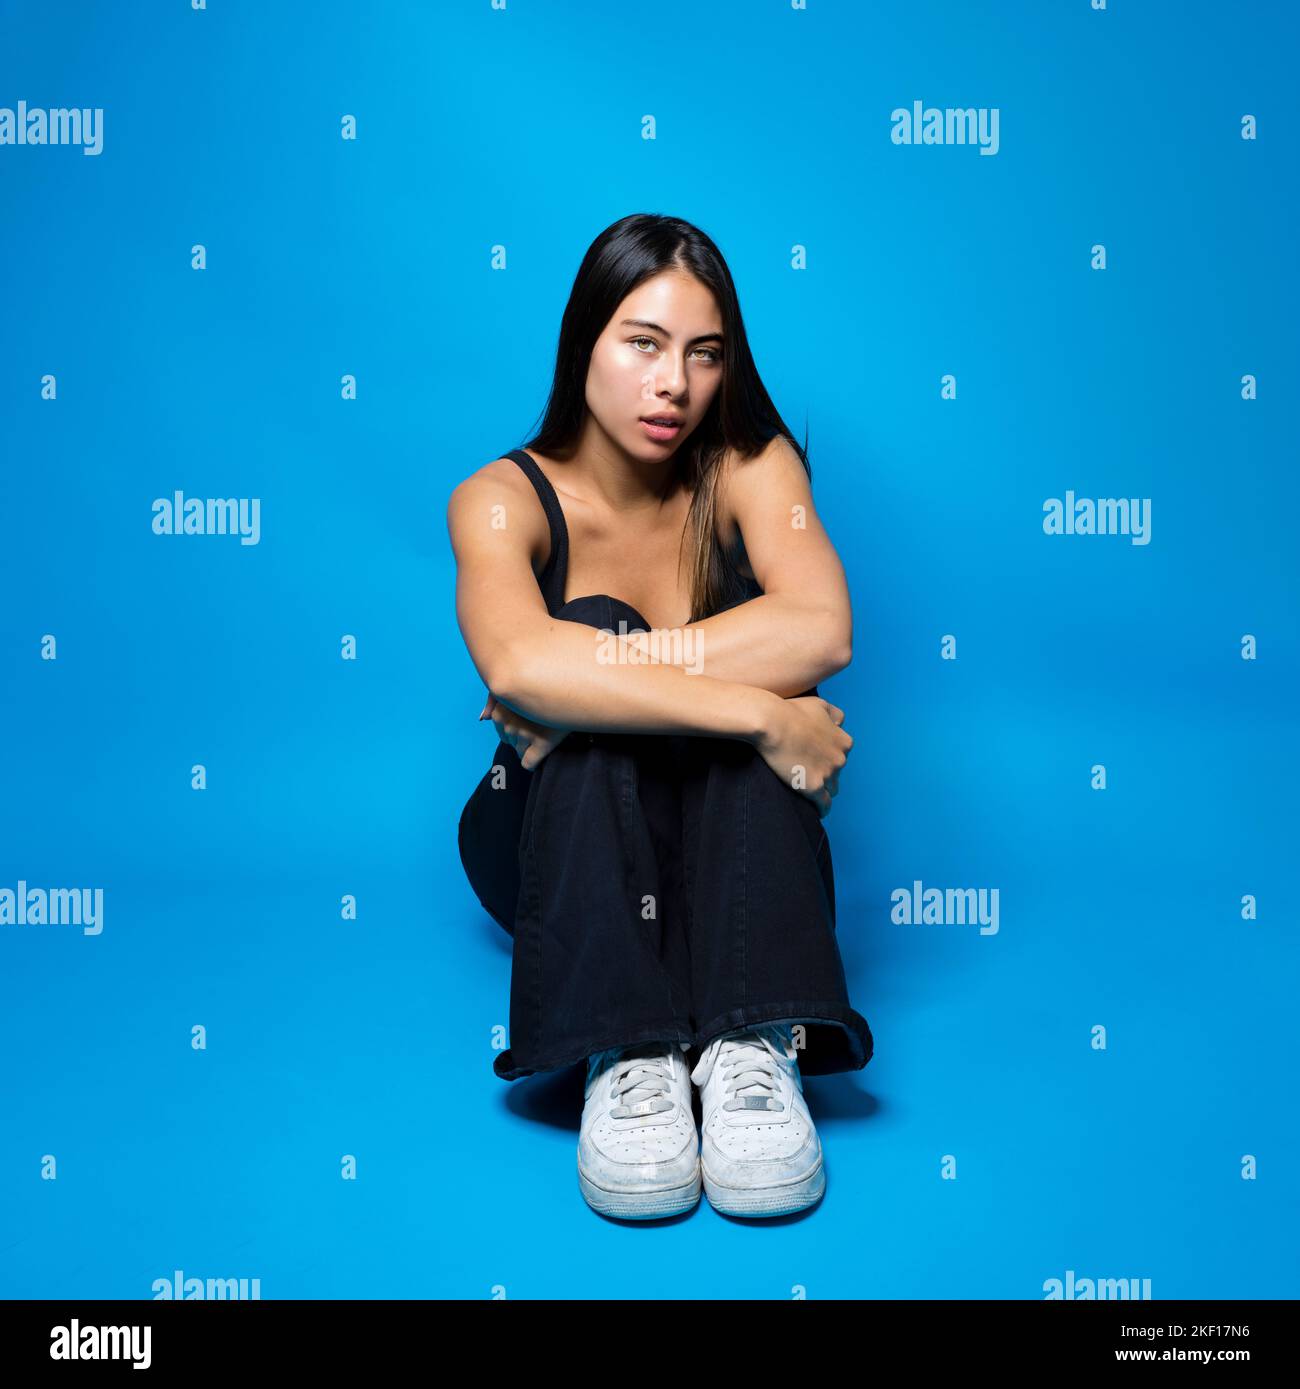 Multiracial Teen Seated on the Floor in Fetal Position on Blue Background with Copy Space Stock Photo